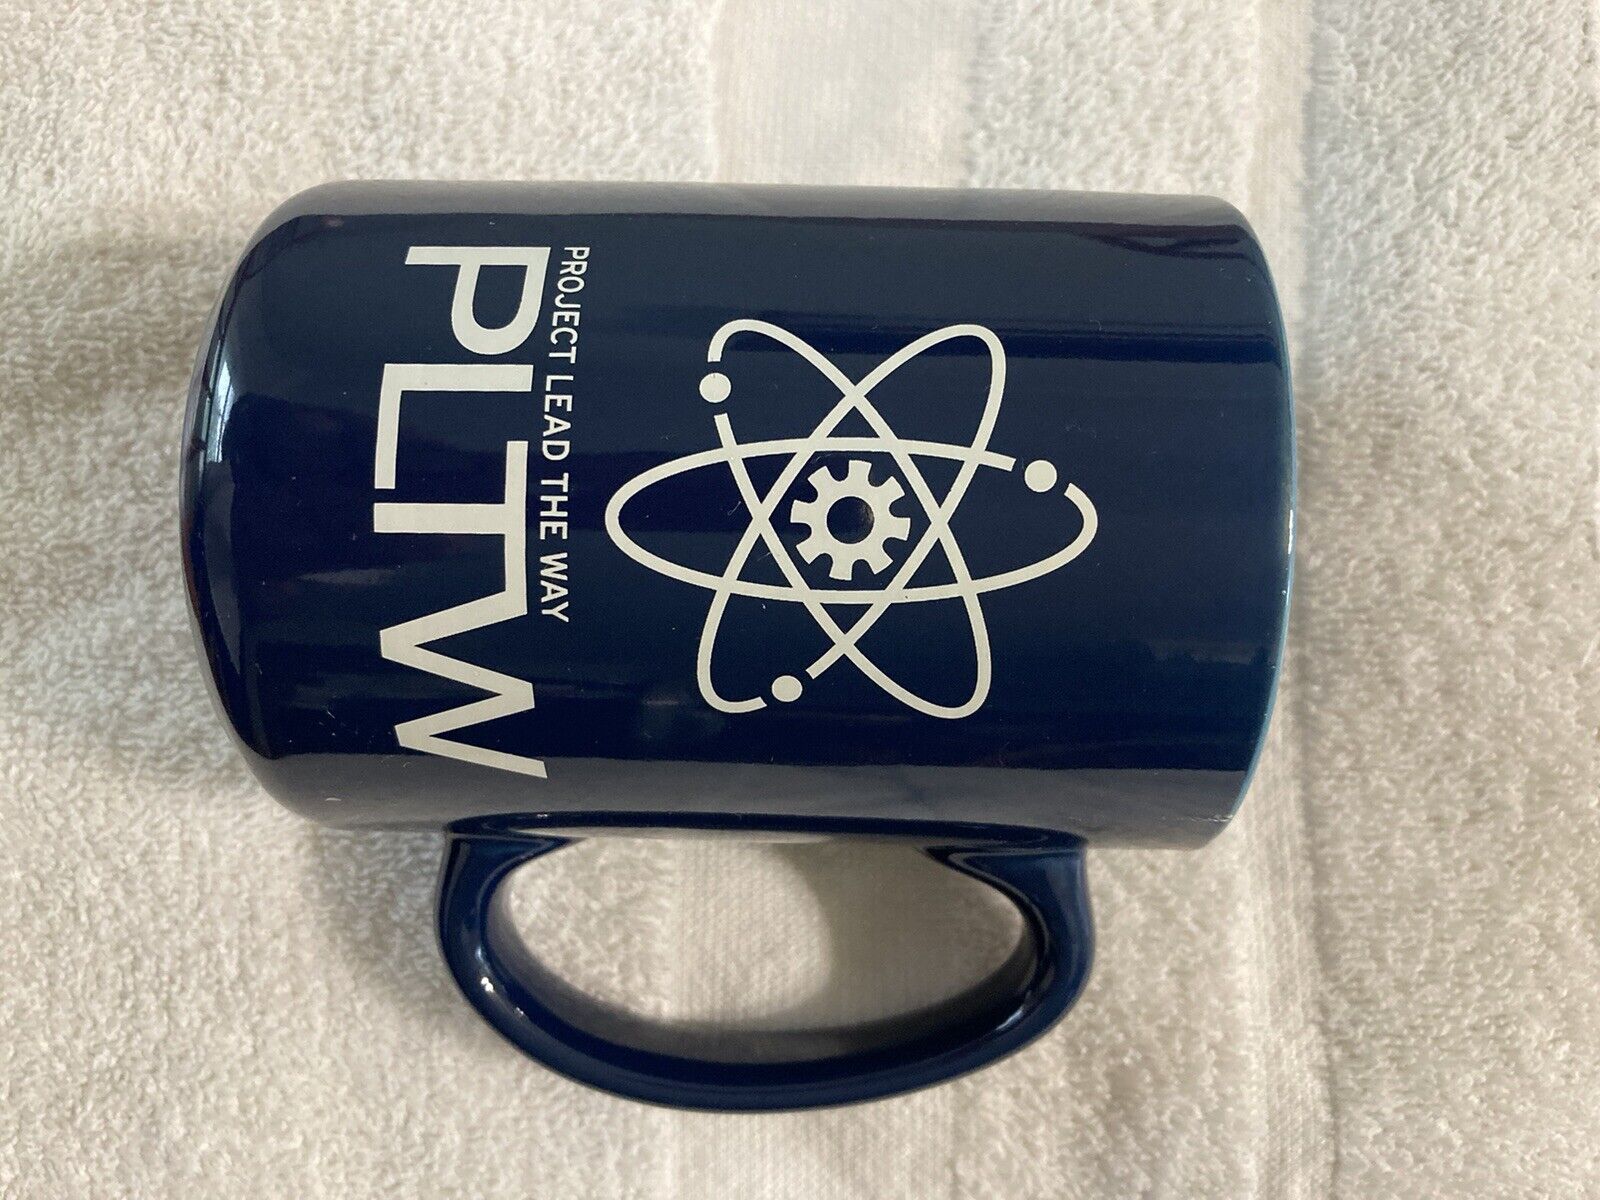 RARE Project Lead The Way PLTW Oversized Coffee Mug Promotional VIP Item NEW